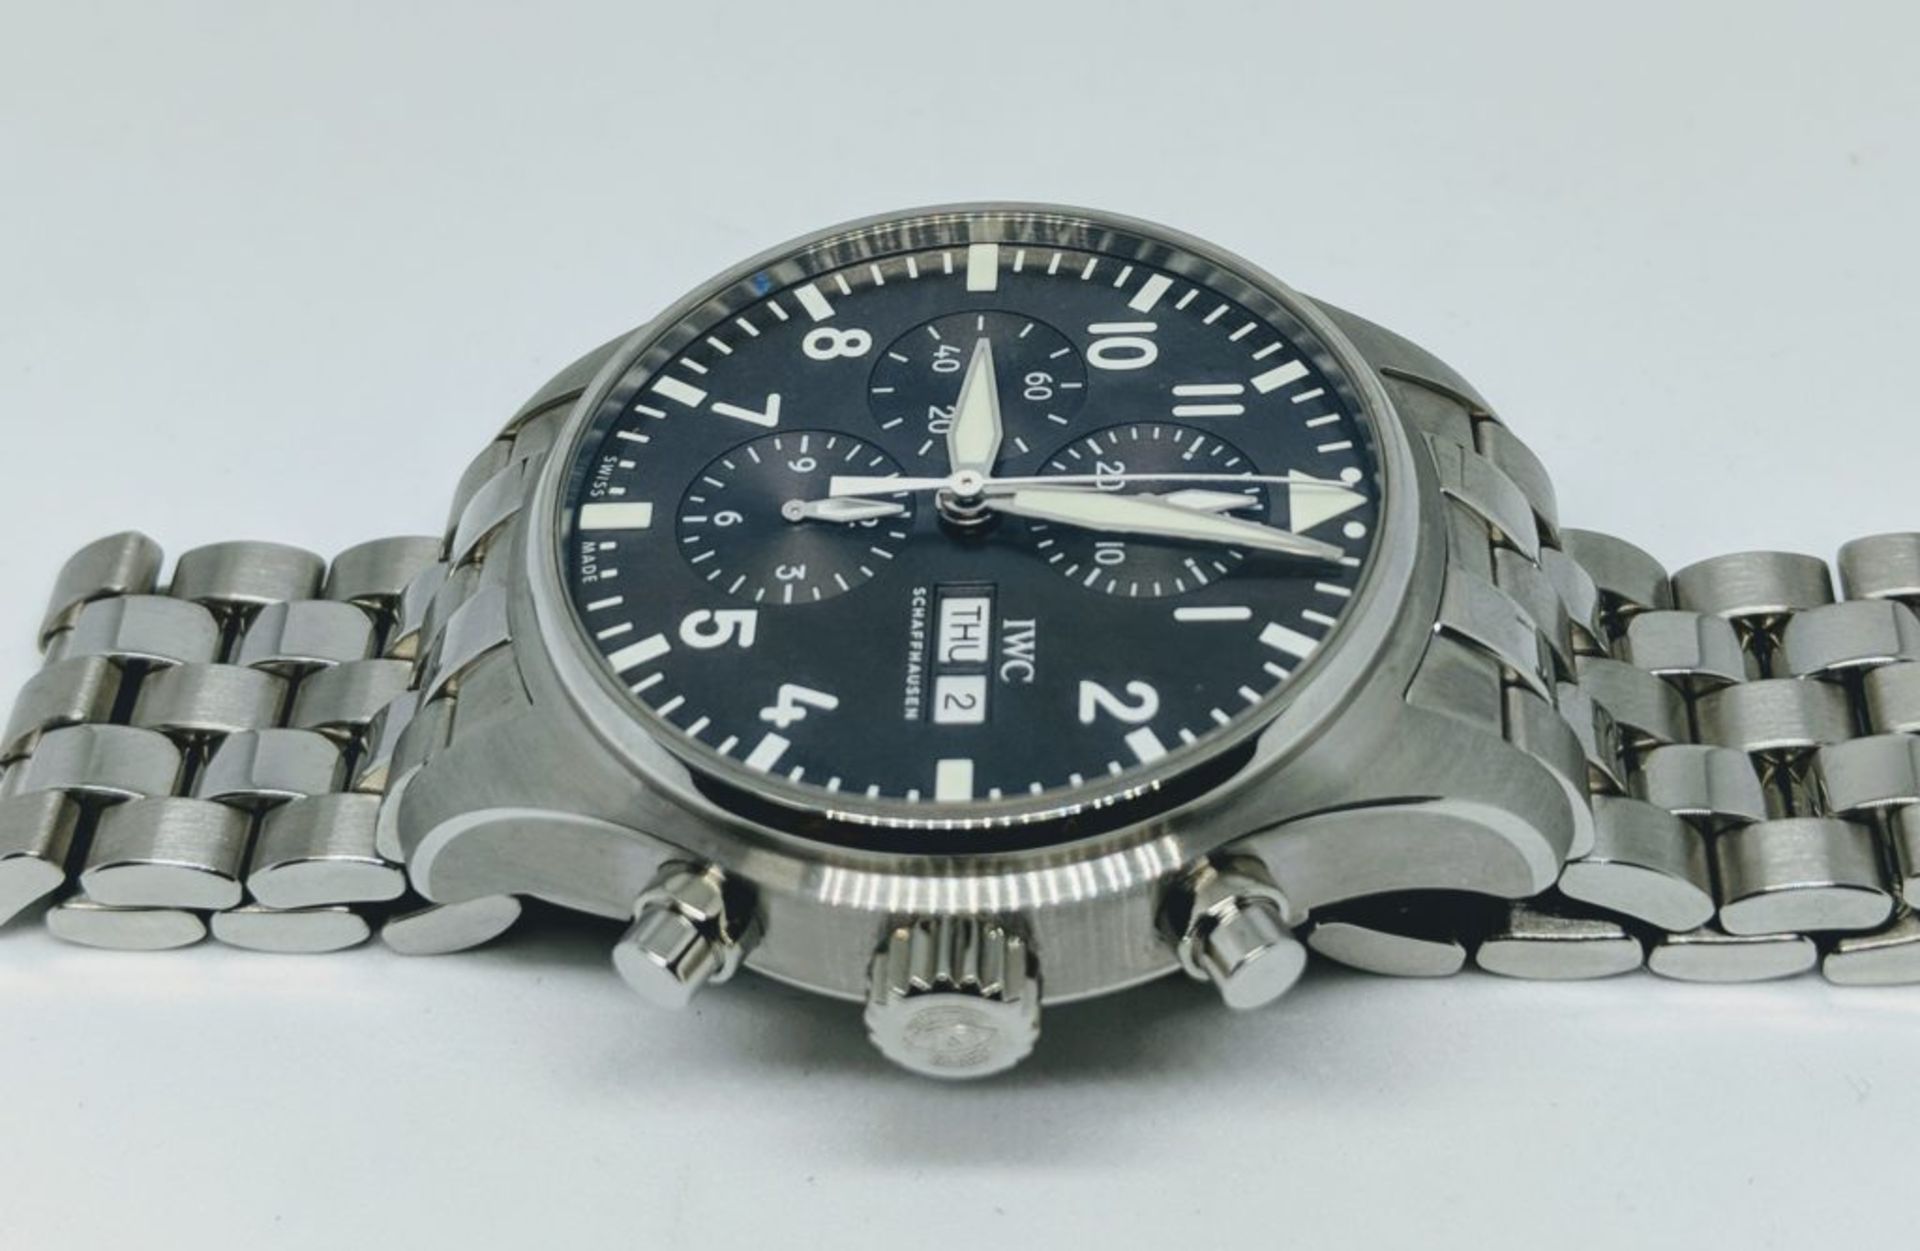 IWC – Pilot’s Watch Chronograph Spitfire - Image 2 of 4